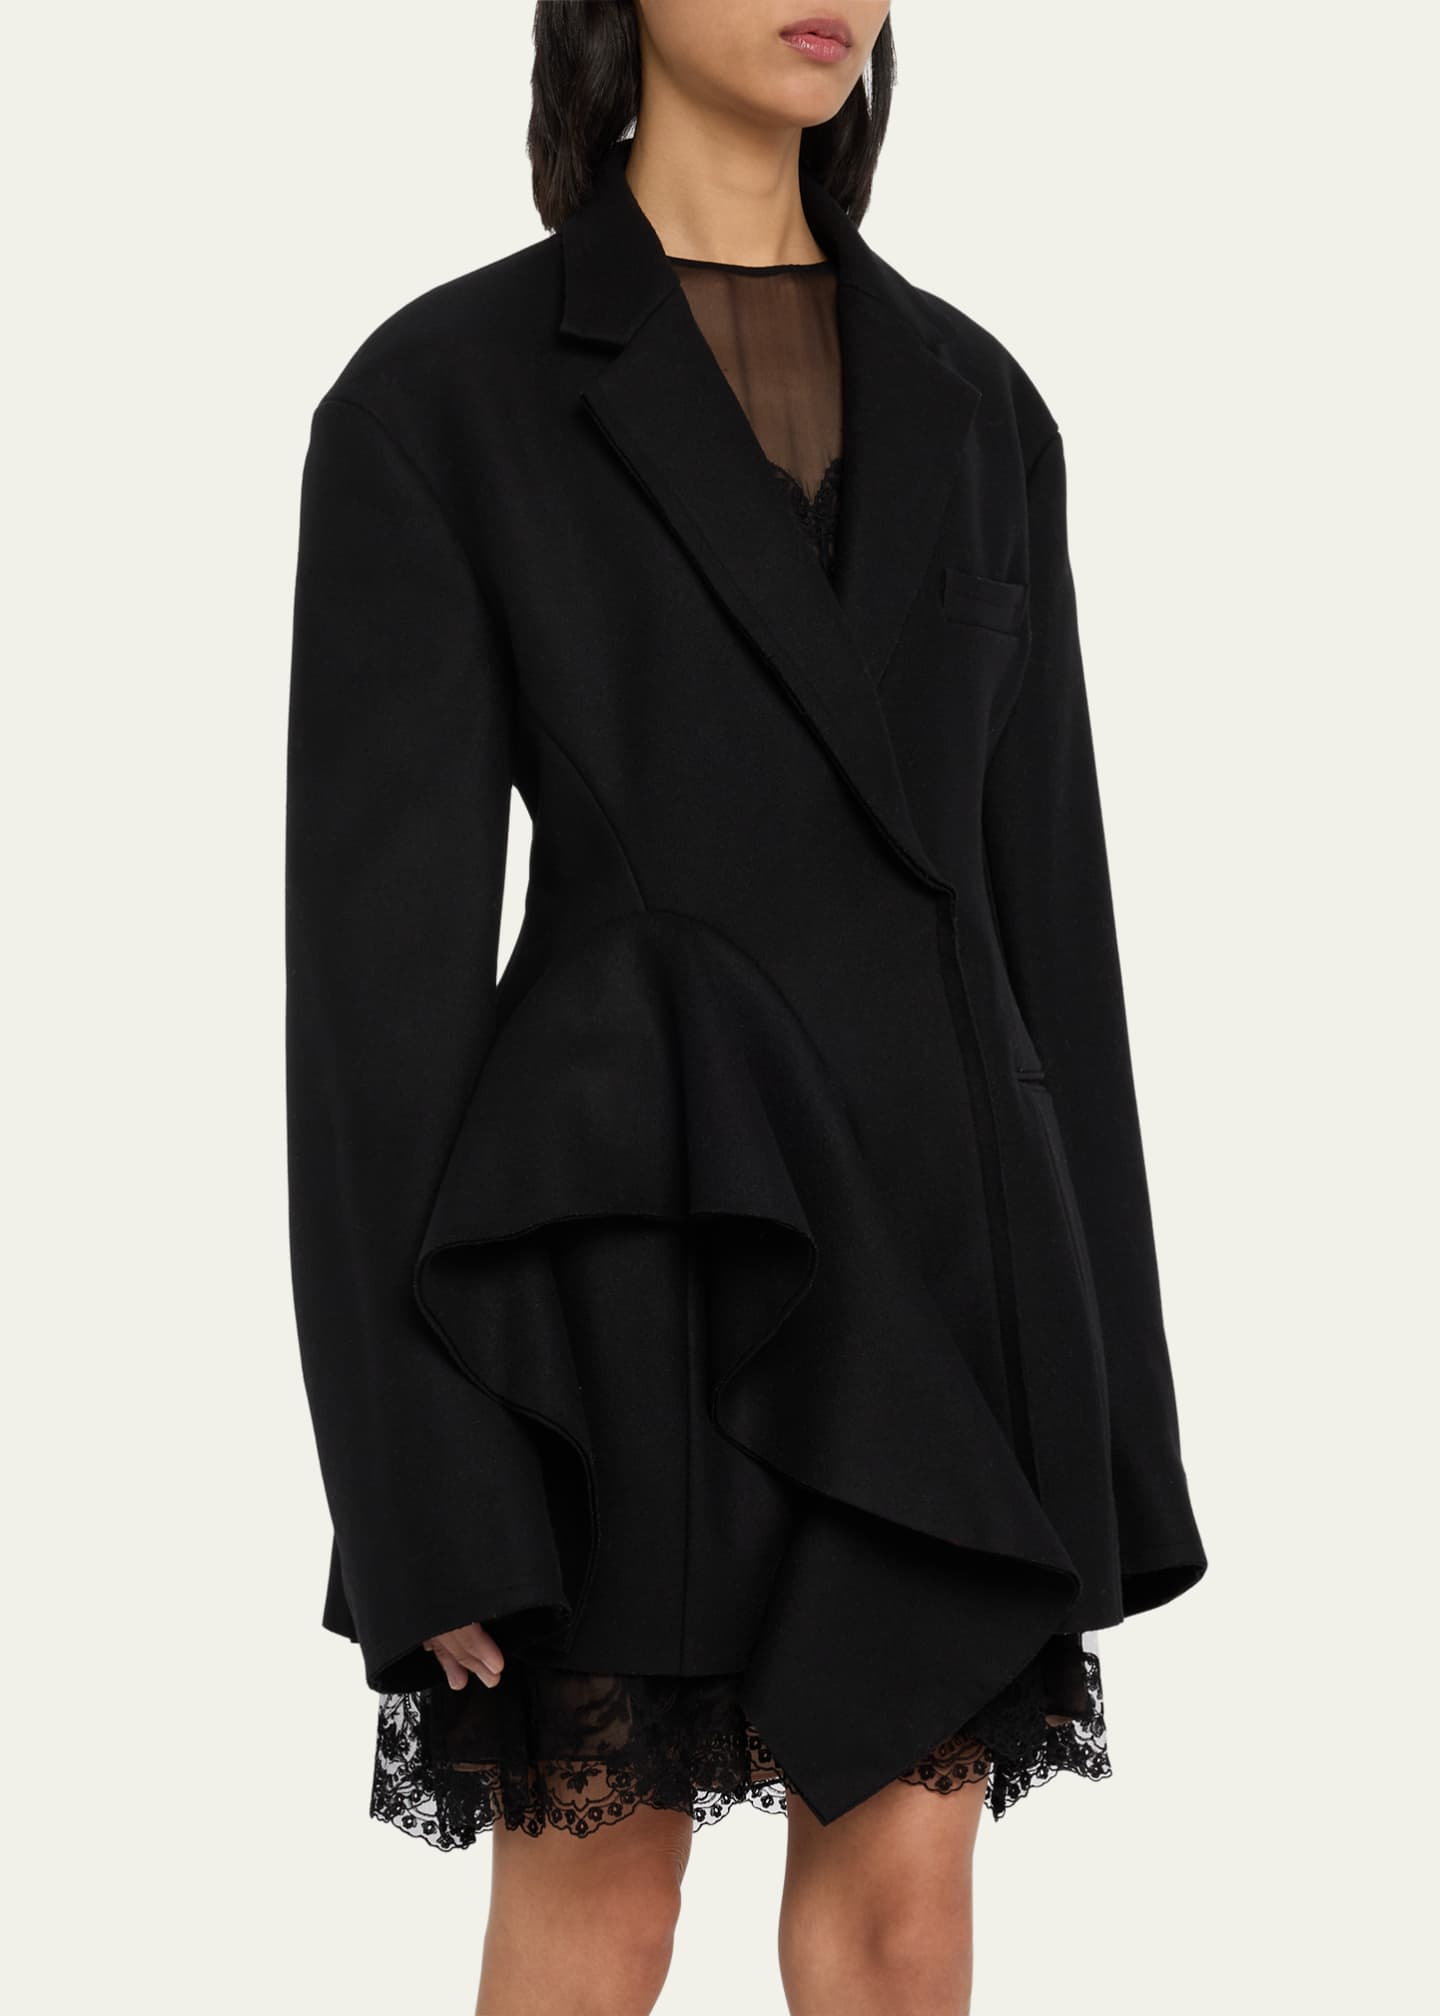 Jason Wu Collection Wool Melton Sculpted Jacket with Ruffle Detail ...